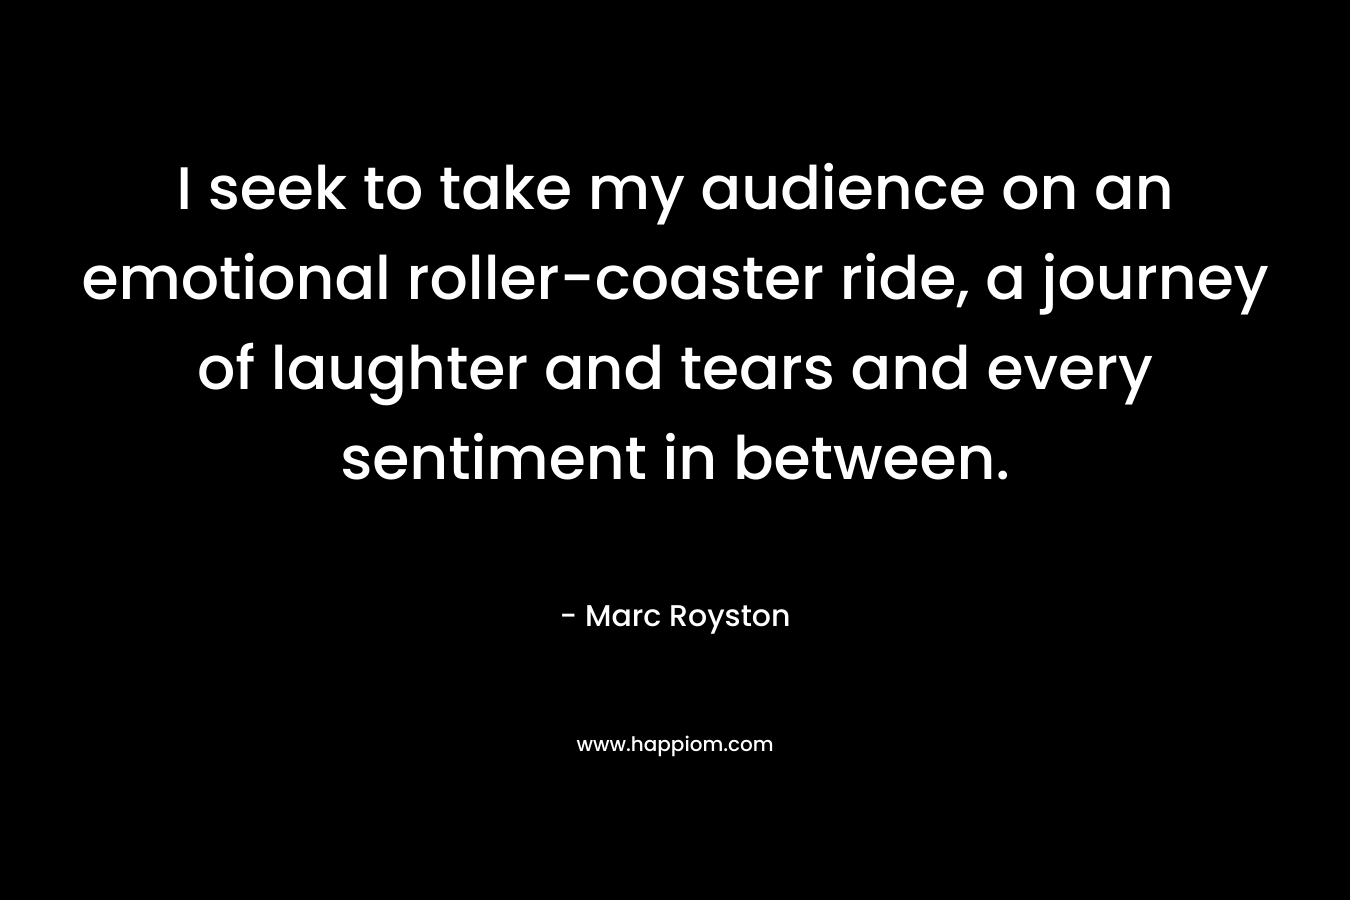 I seek to take my audience on an emotional roller-coaster ride, a journey of laughter and tears and every sentiment in between. – Marc Royston